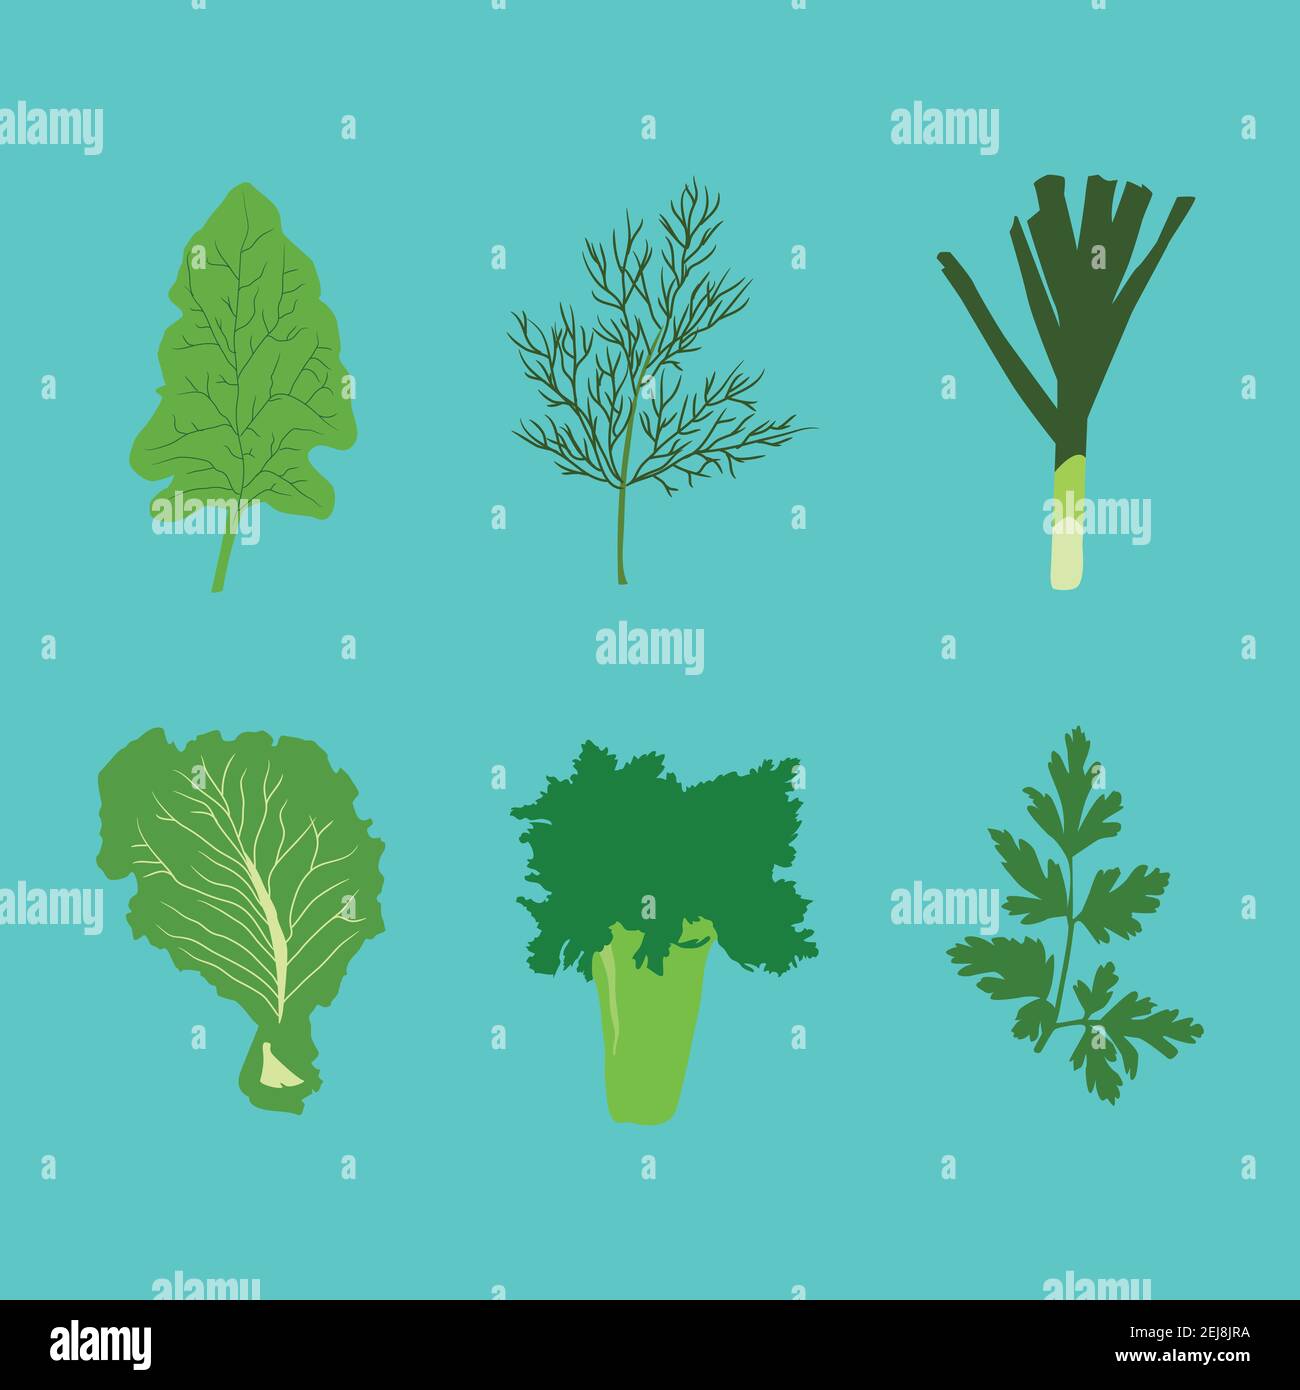 Vegetables icons flat set. isolated vector illustration. vector background. Flat icons. fresh food. healthy food. vegetables diet Stock Vector